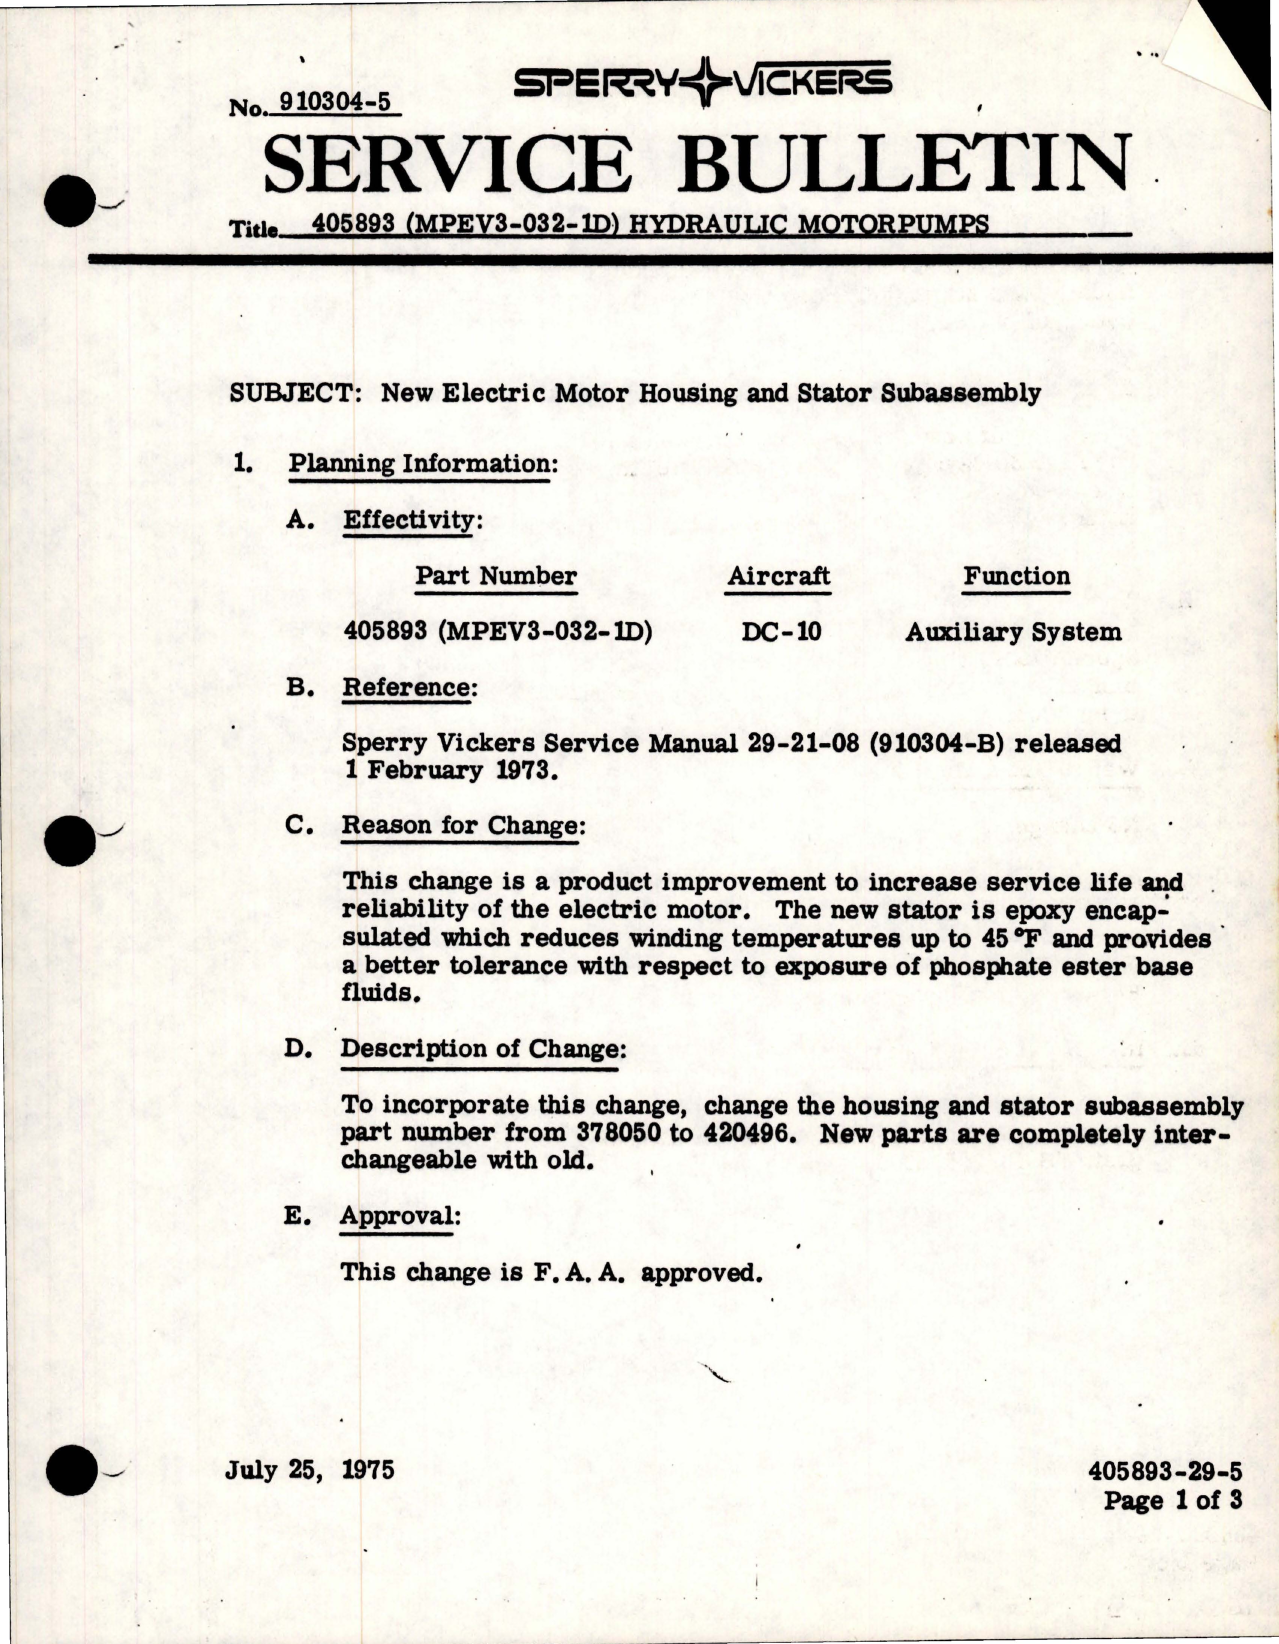 Sample page 1 from AirCorps Library document: Hydraulic Motorpump - New Electric Motor Housing and Stator Subassembly - Part 405893 - Model MPEV3-032-1D